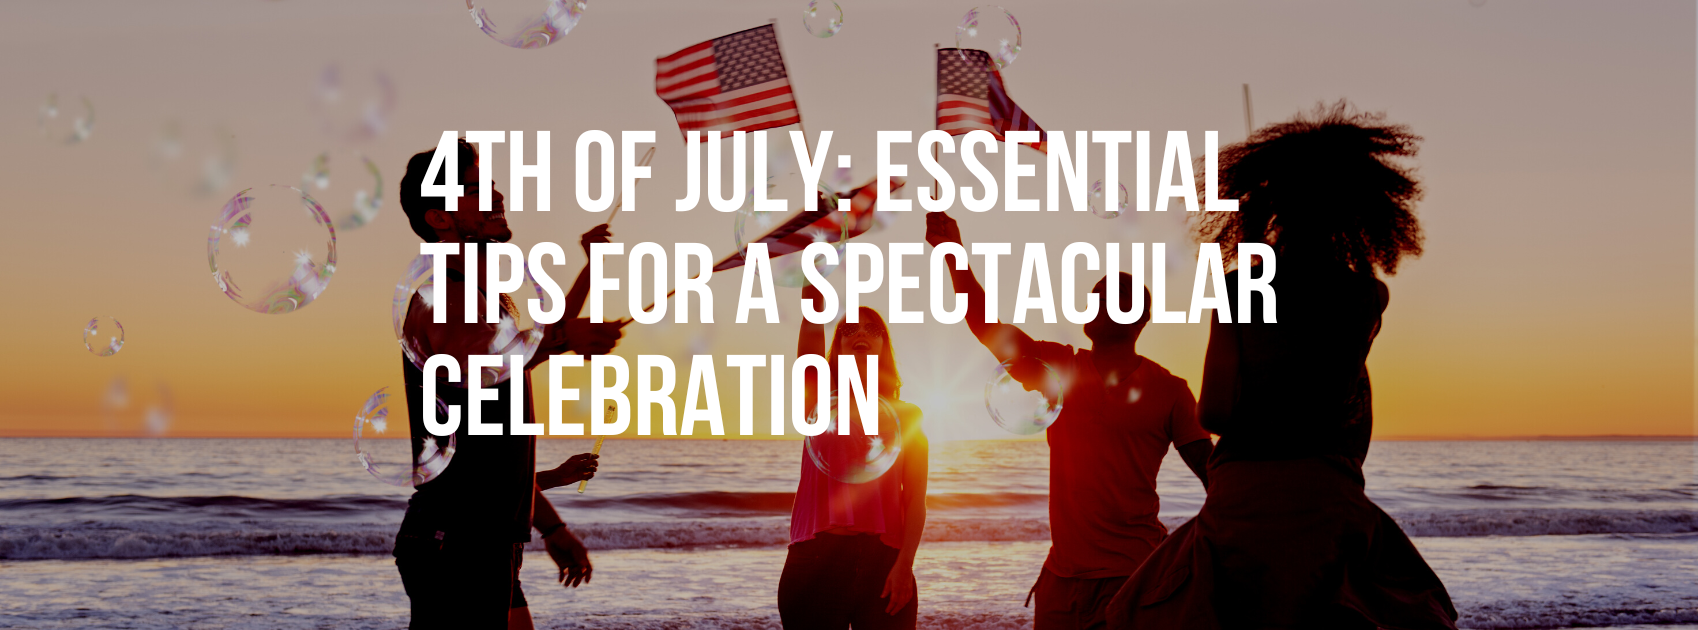 4th of July: Essential Tips for a Spectacular Celebration